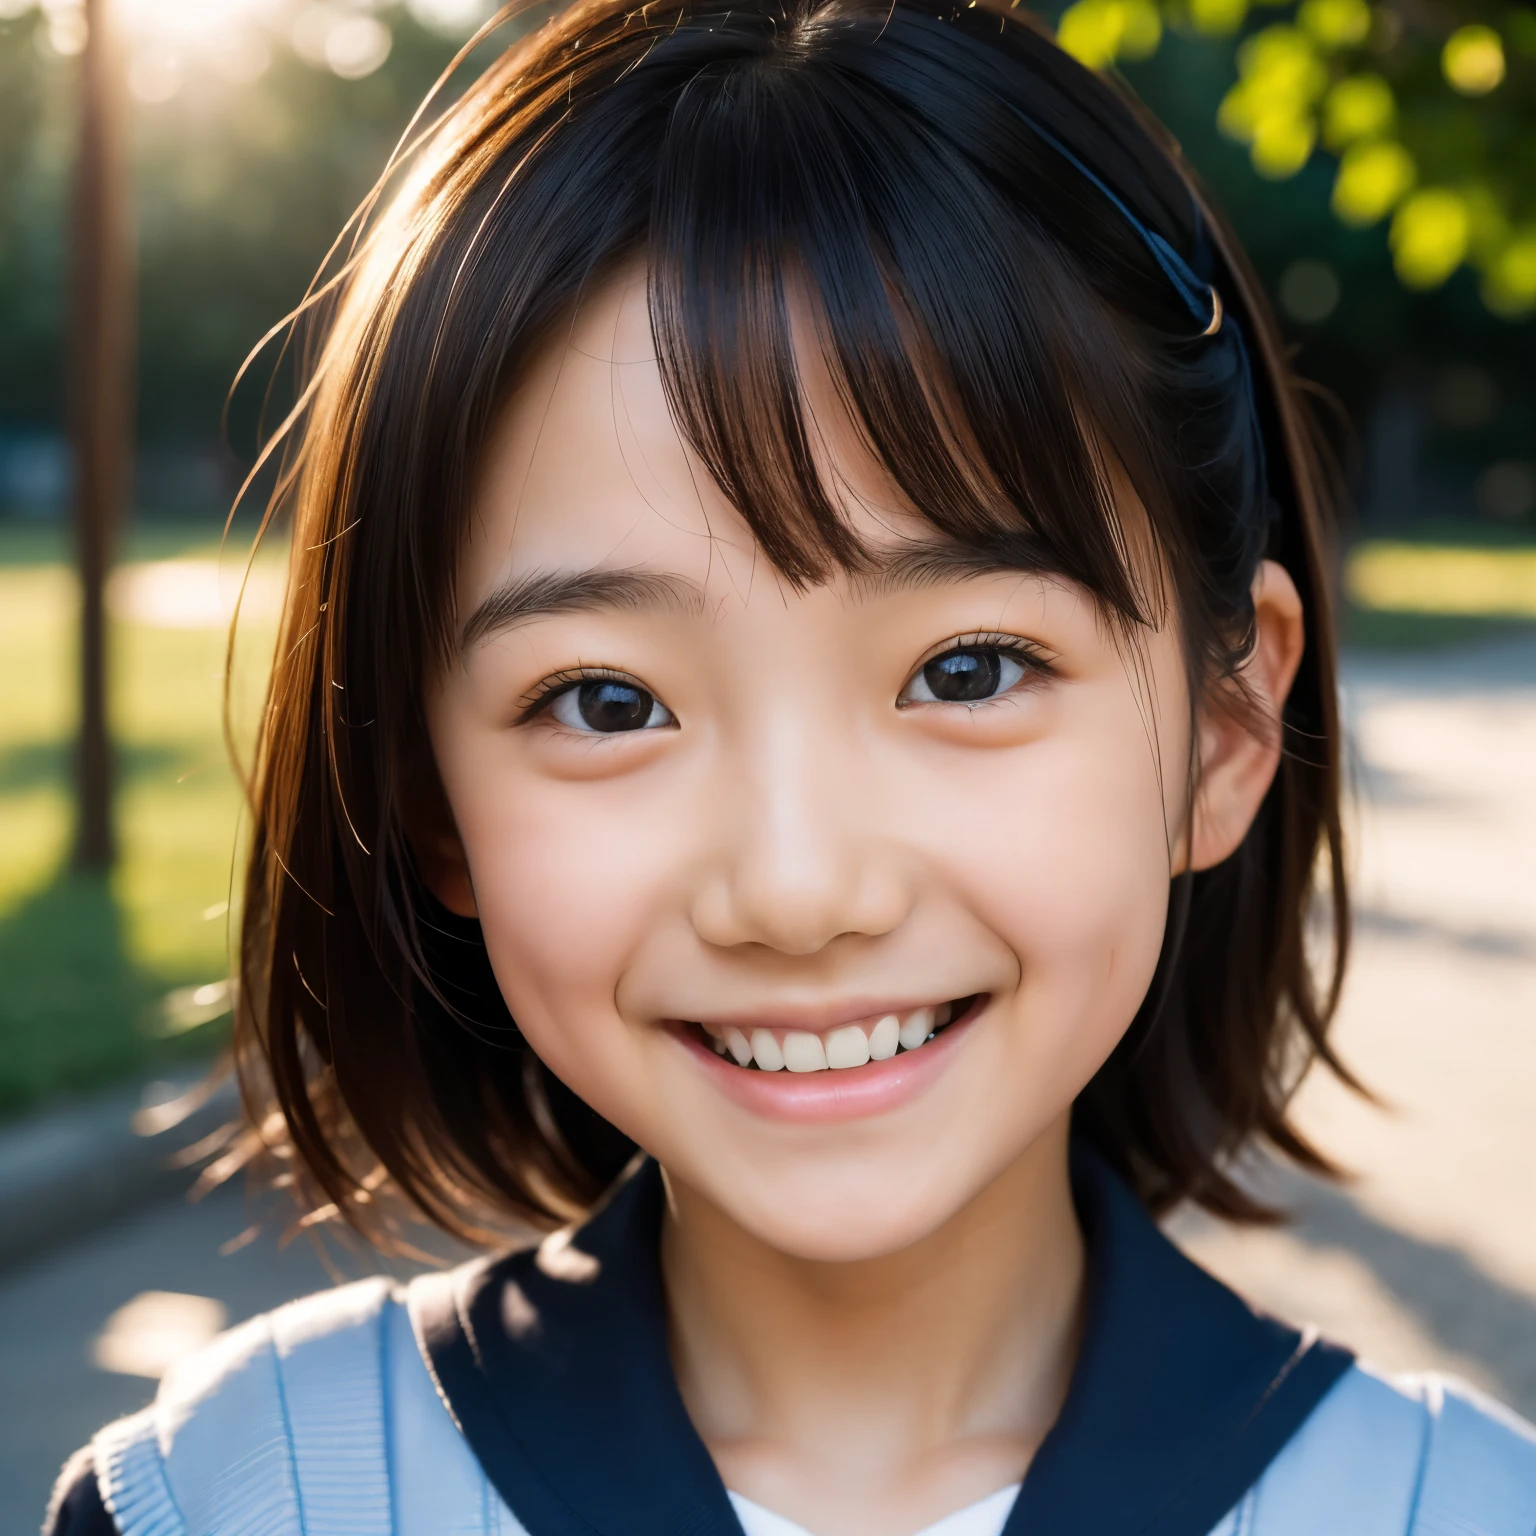 lens: 135mm f1.8, (highest quality),(RAW Photos), (Tabletop:1.1), (Beautiful 11 year old Japanese girl), Cute face, (Deeply chiseled face:0.7), (freckles:0.4), dappled sunlight, Dramatic lighting, (Japanese School Uniform), (On campus), shy, (Close-up shot:1.2), (smile),, (Sparkling eyes)、(sunlight)